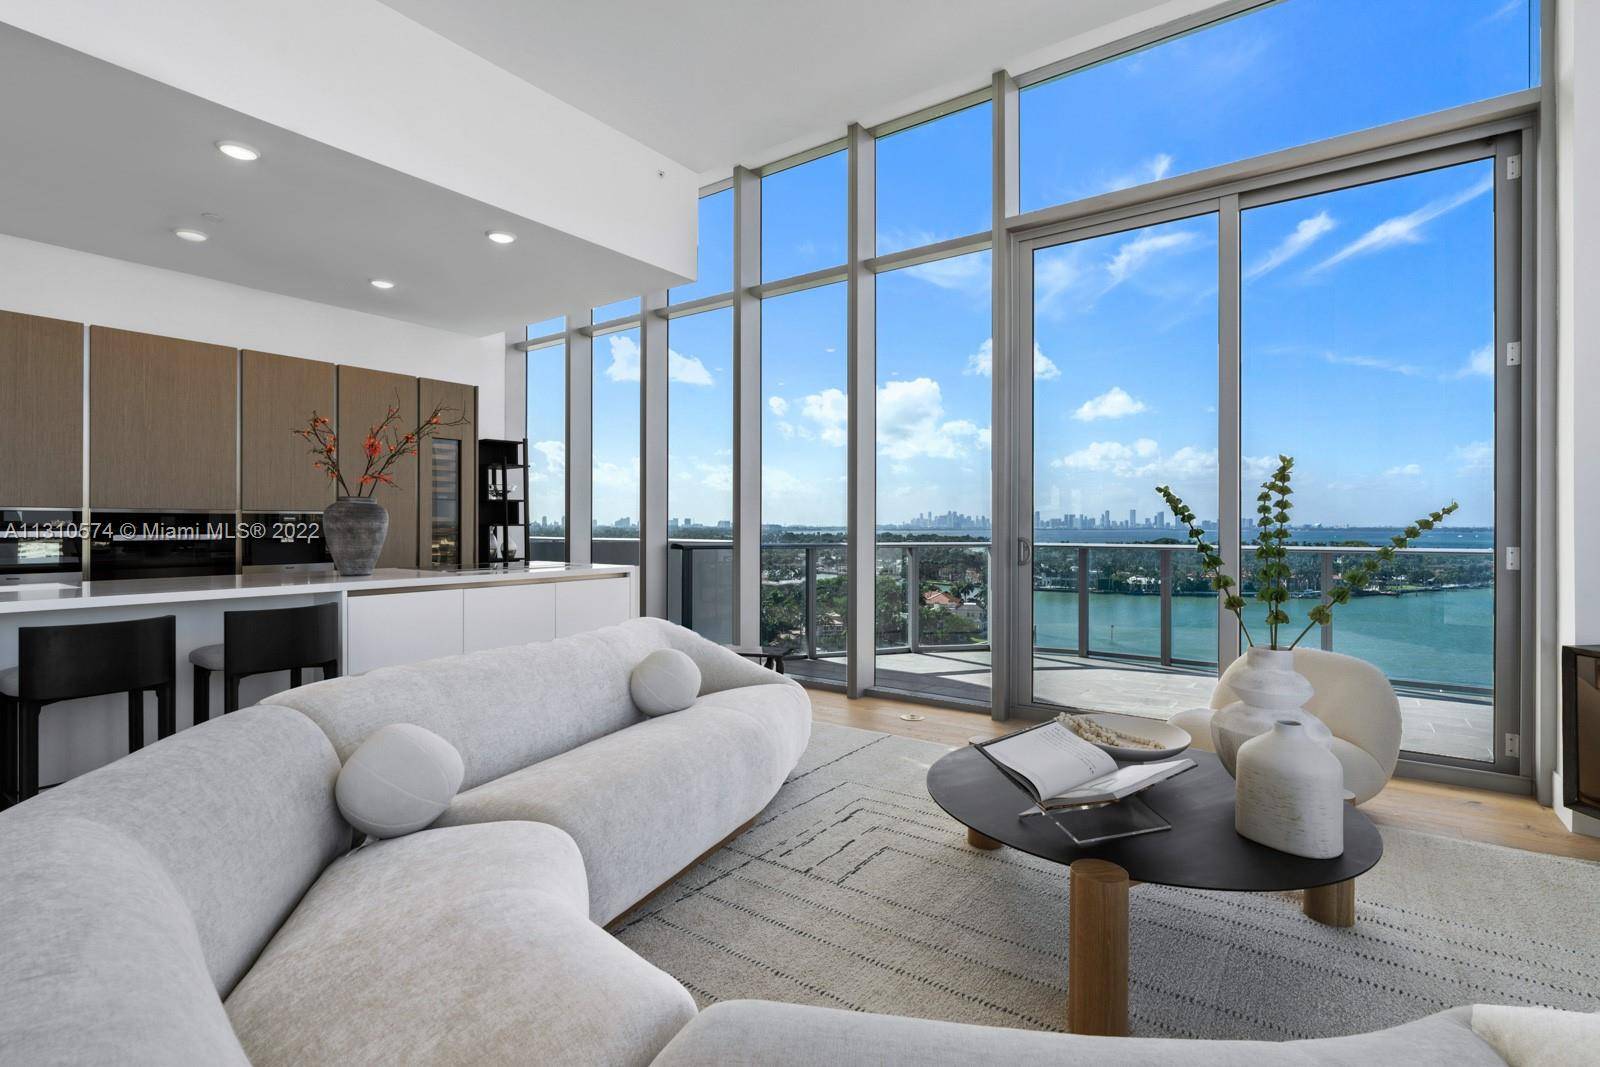 Step Inside With Me ! The Penthouse at Monaco Yacht Club is the newest premier residence in Miami Beach.